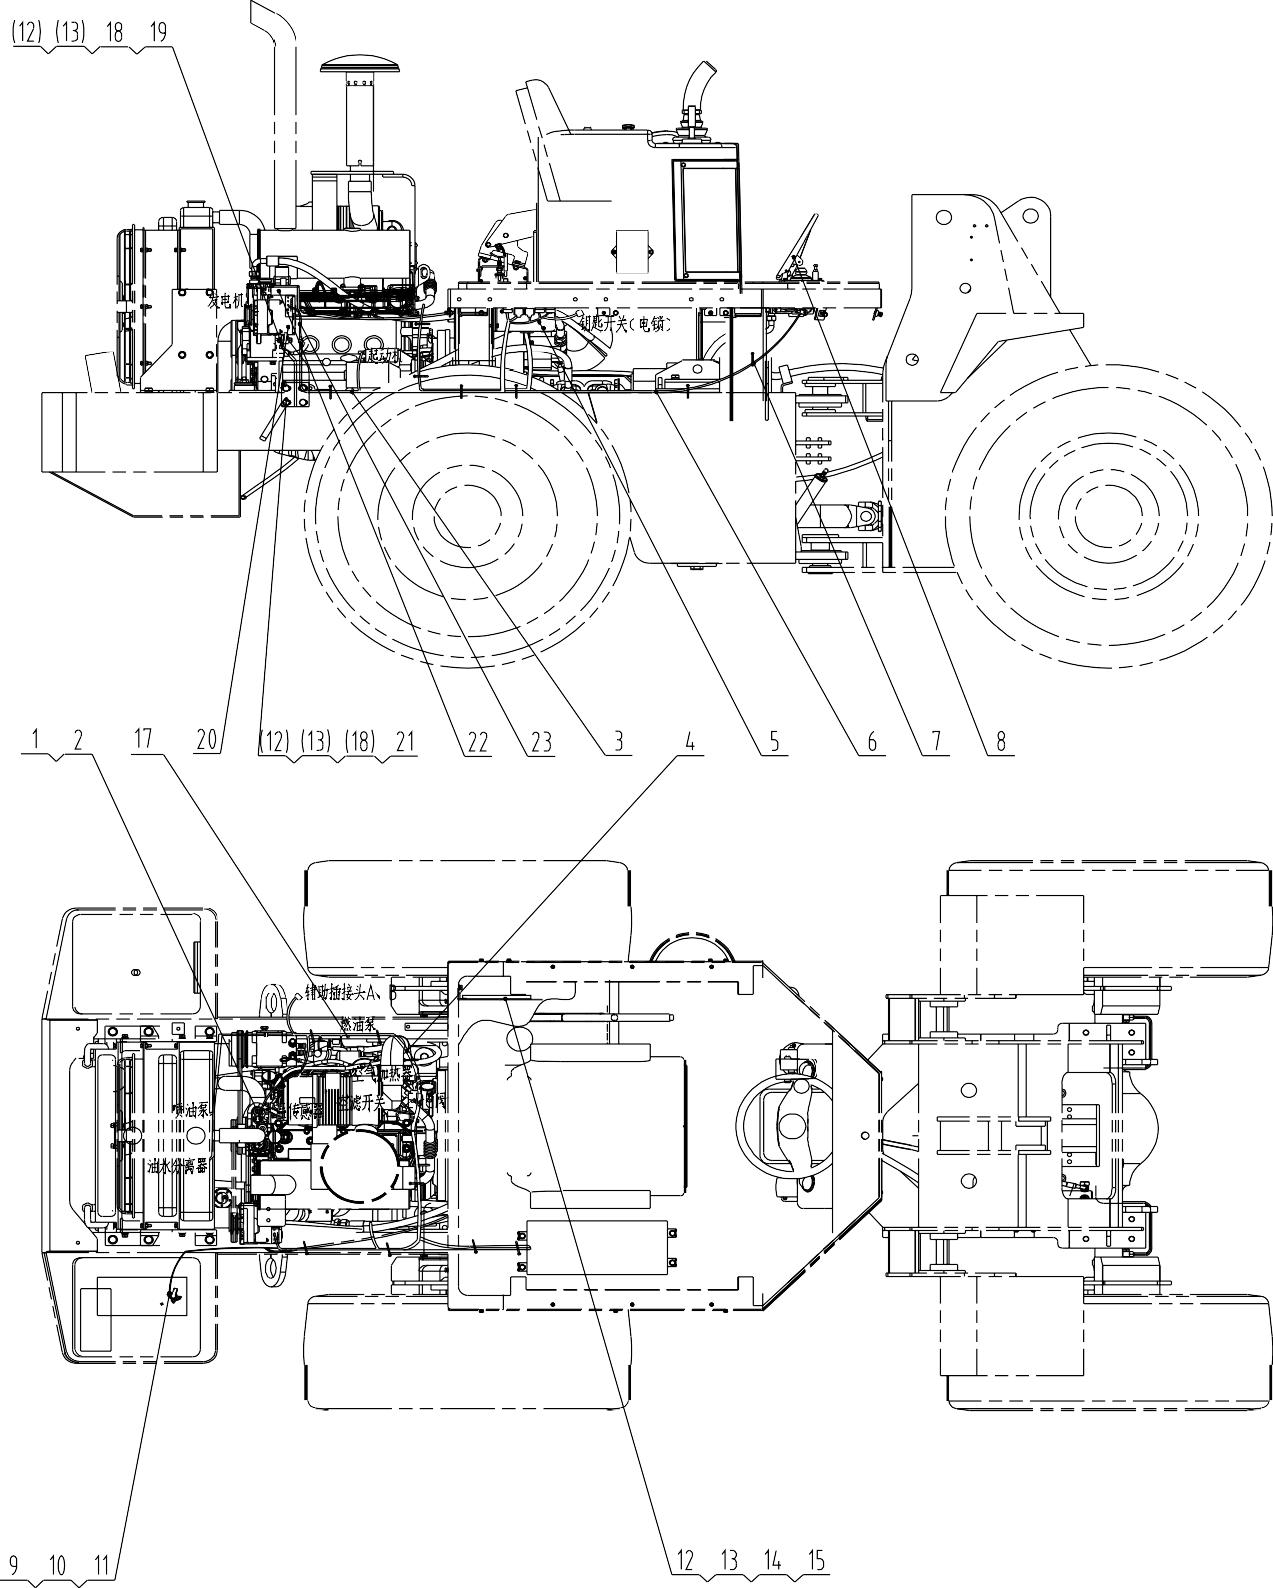 46C1575 005 , ENGINE WIRING AS, LIUGONG PARTS CATALOGUES